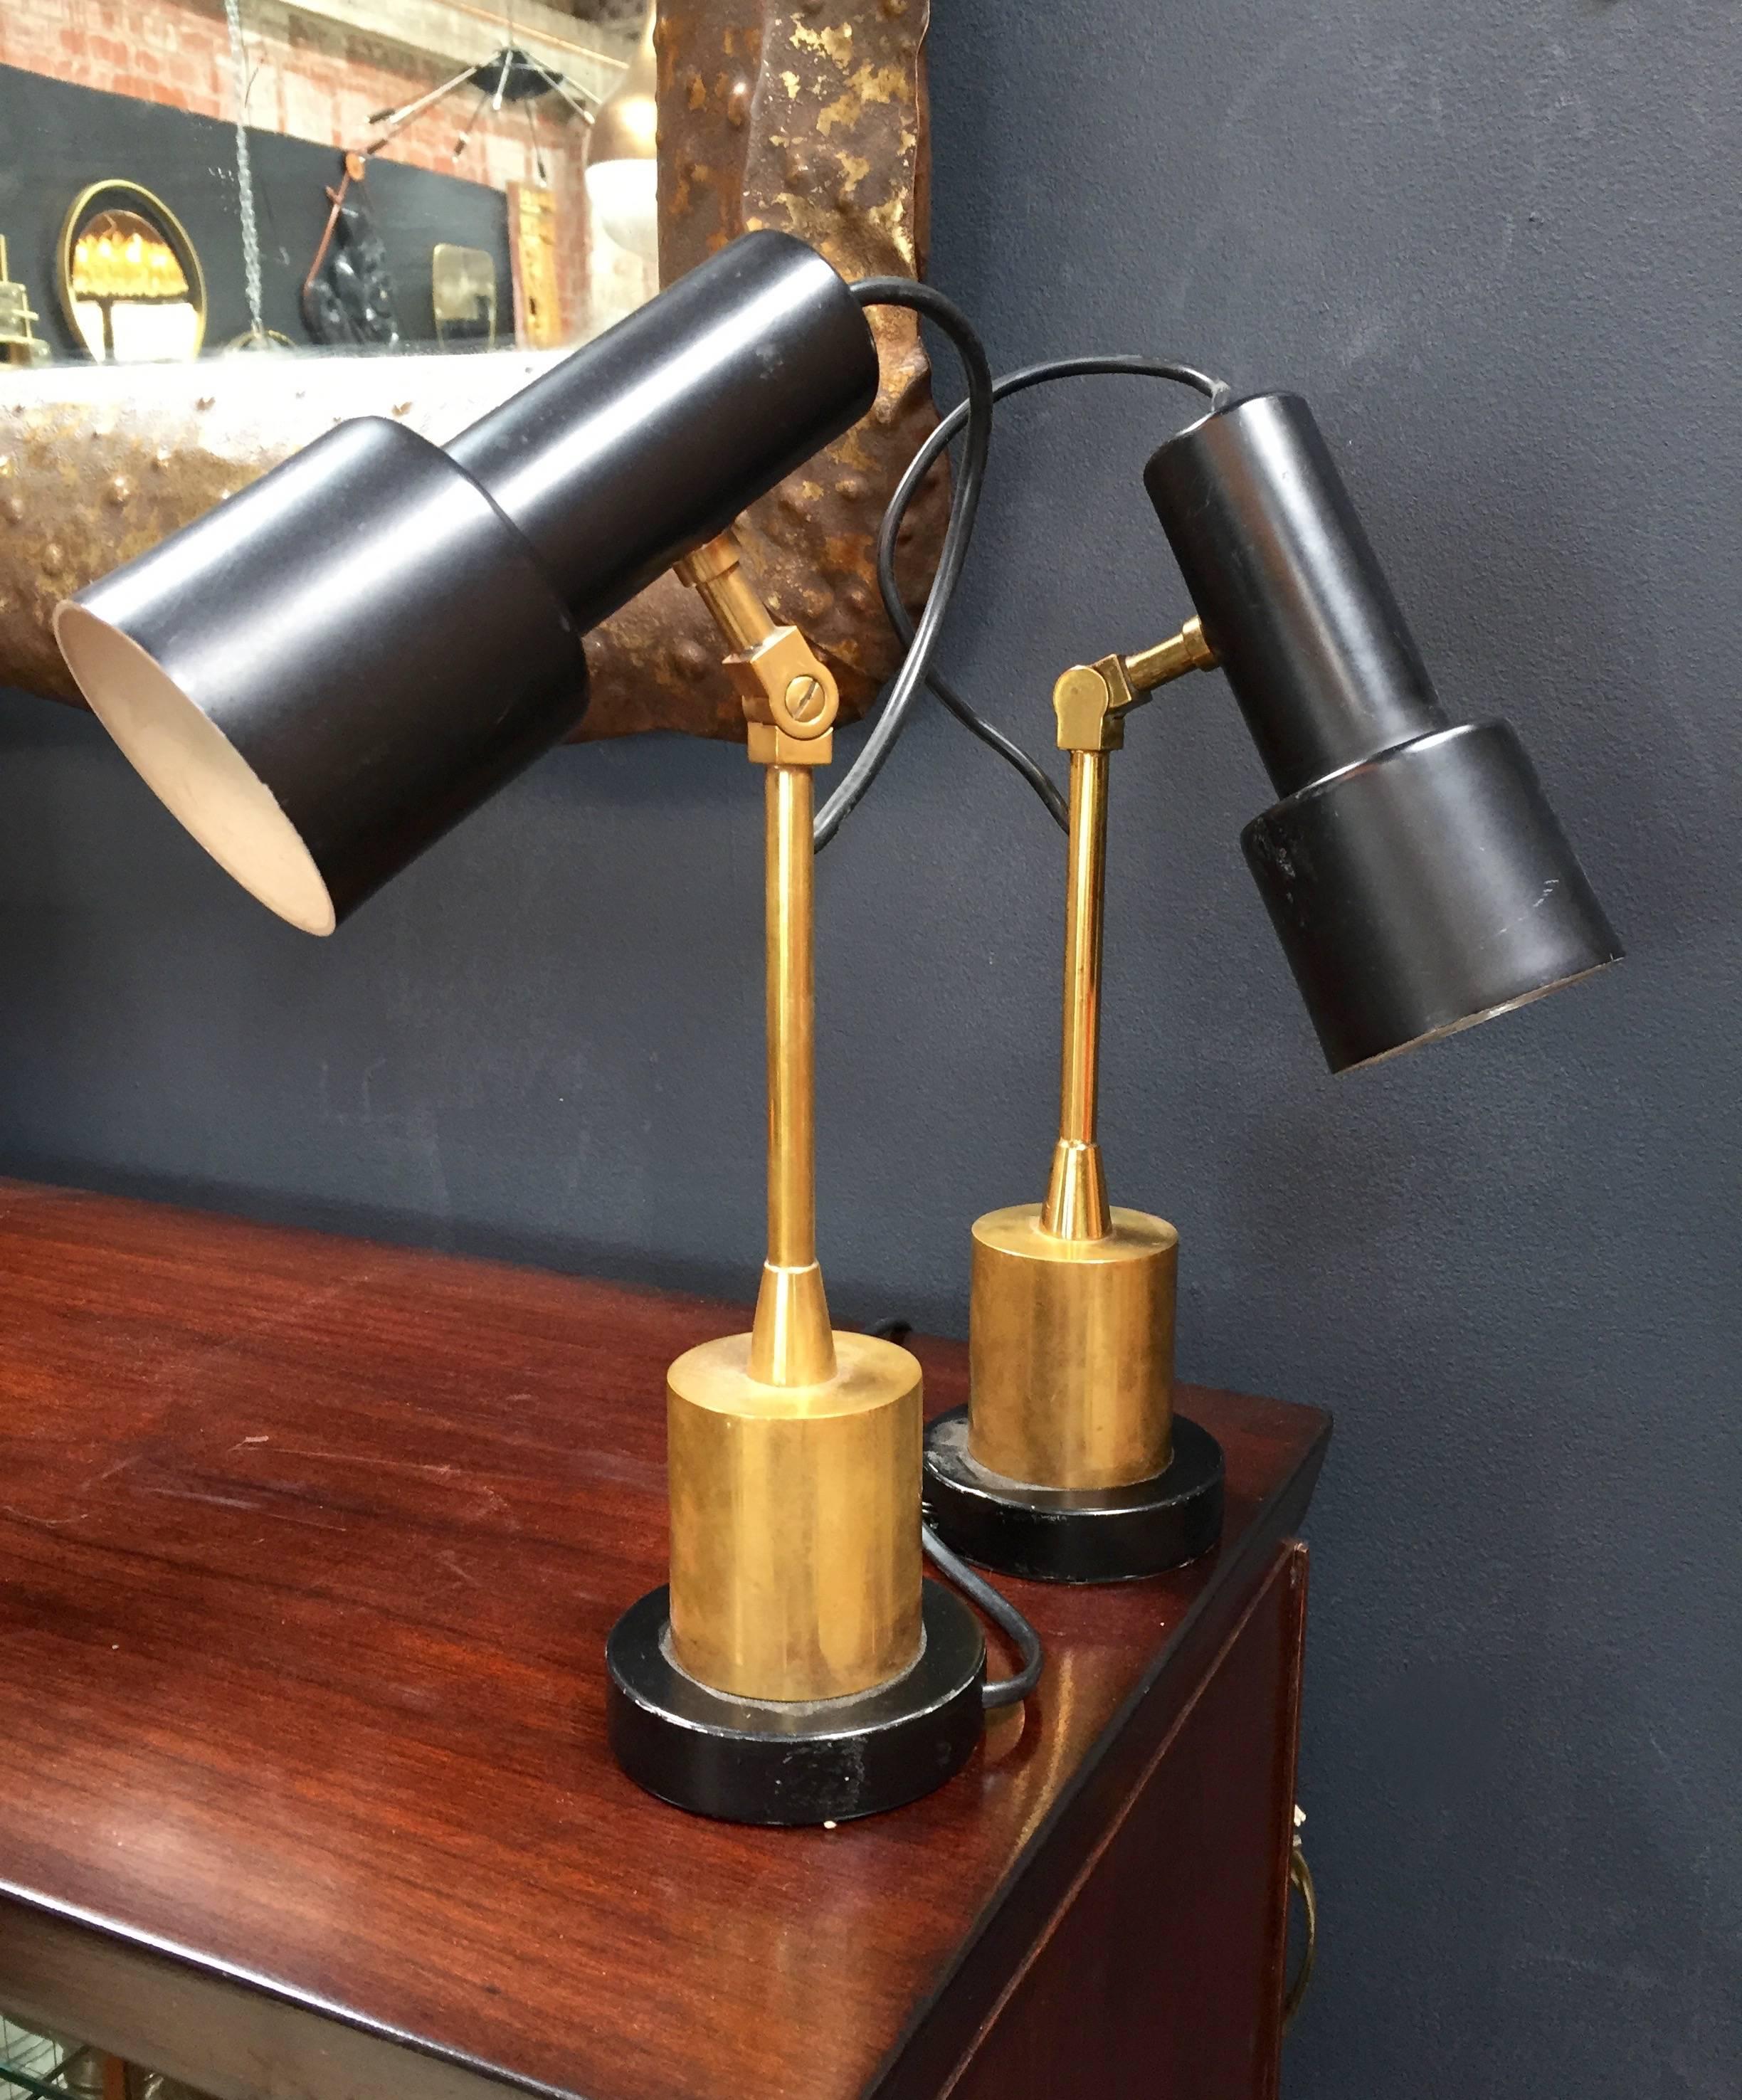 Pair of rare articulated Italian Stilnovo table lamps in brass with black metal round base.
The single lamp is composed by three swivels to be adjusted in height and rotating metal shade painted on black.
The shade has one bulb creating a nice